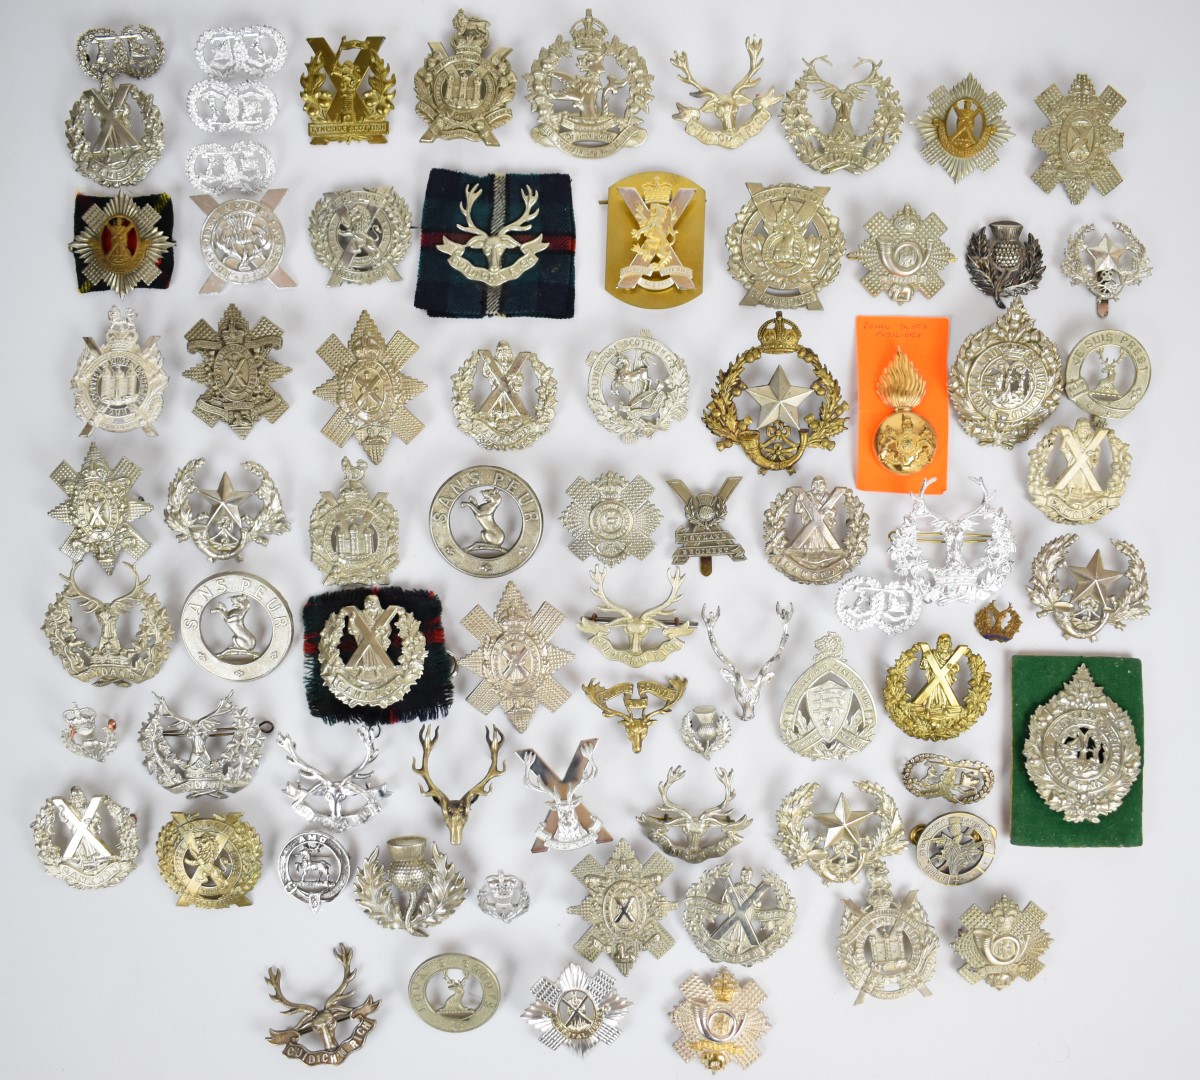 Collection of approximately 60 British Army Scottish Regiment badges including Royal Scots Guards, - Image 4 of 6